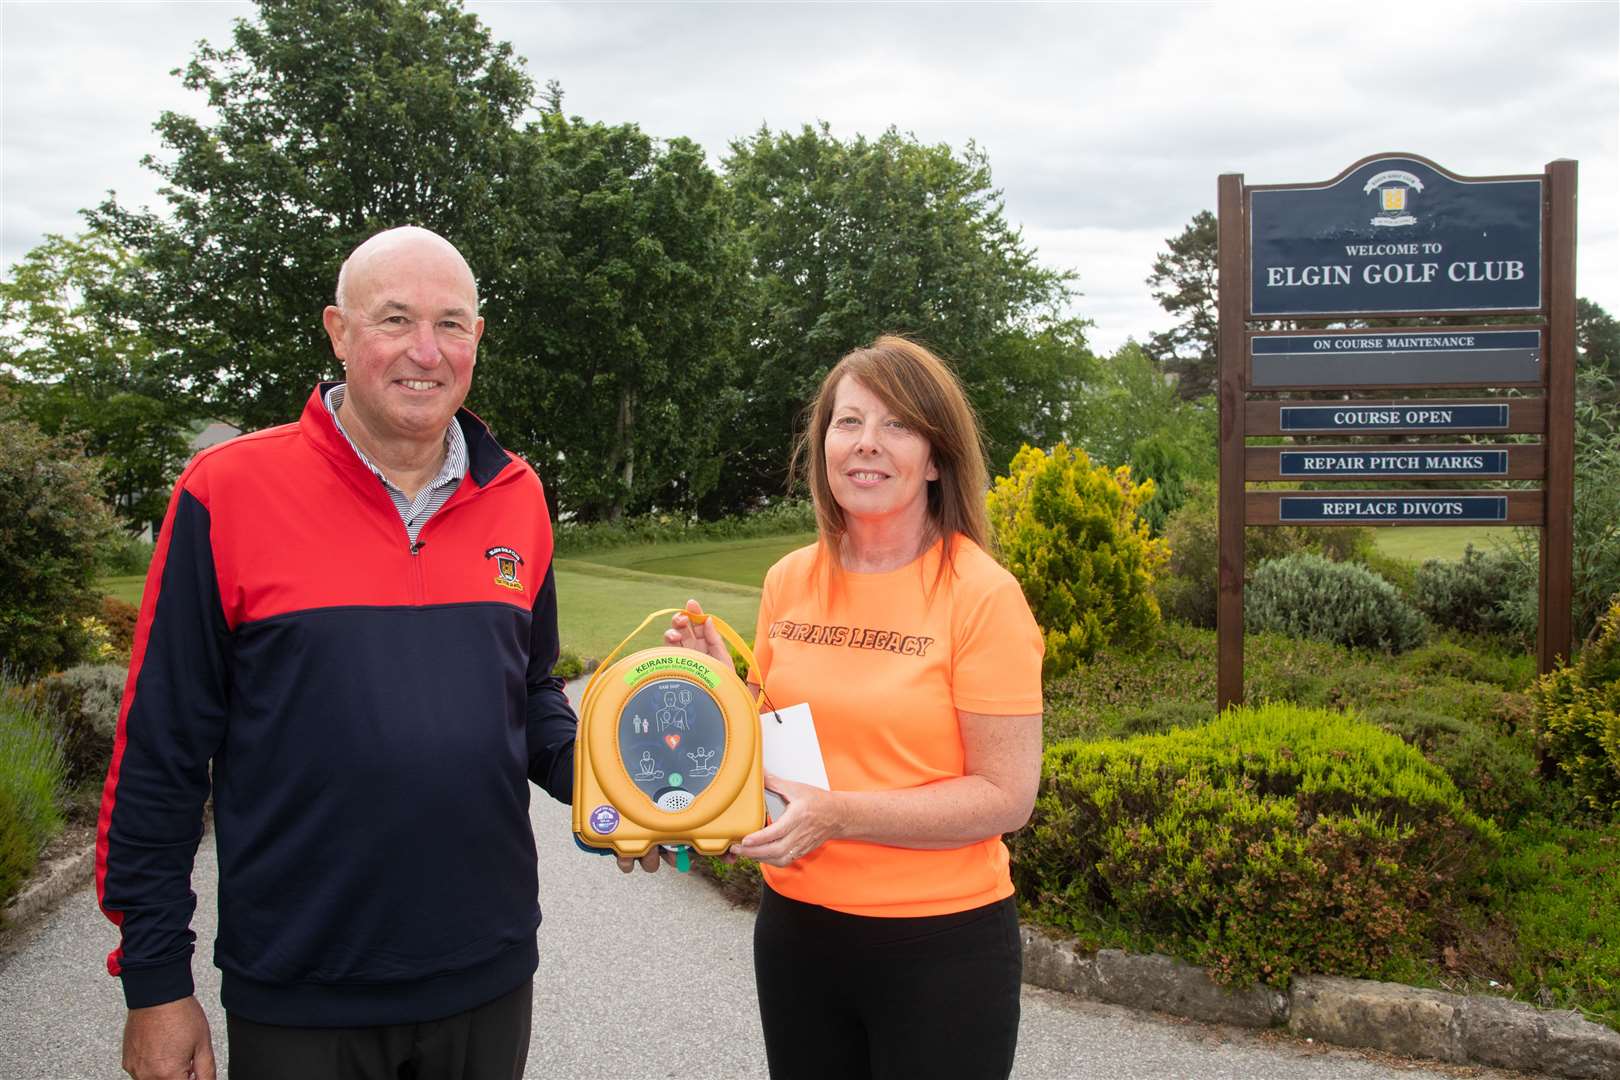 Elgin Golf Club is the latest club in the area to benefit from working with the charity. Picture: Daniel Forsyth